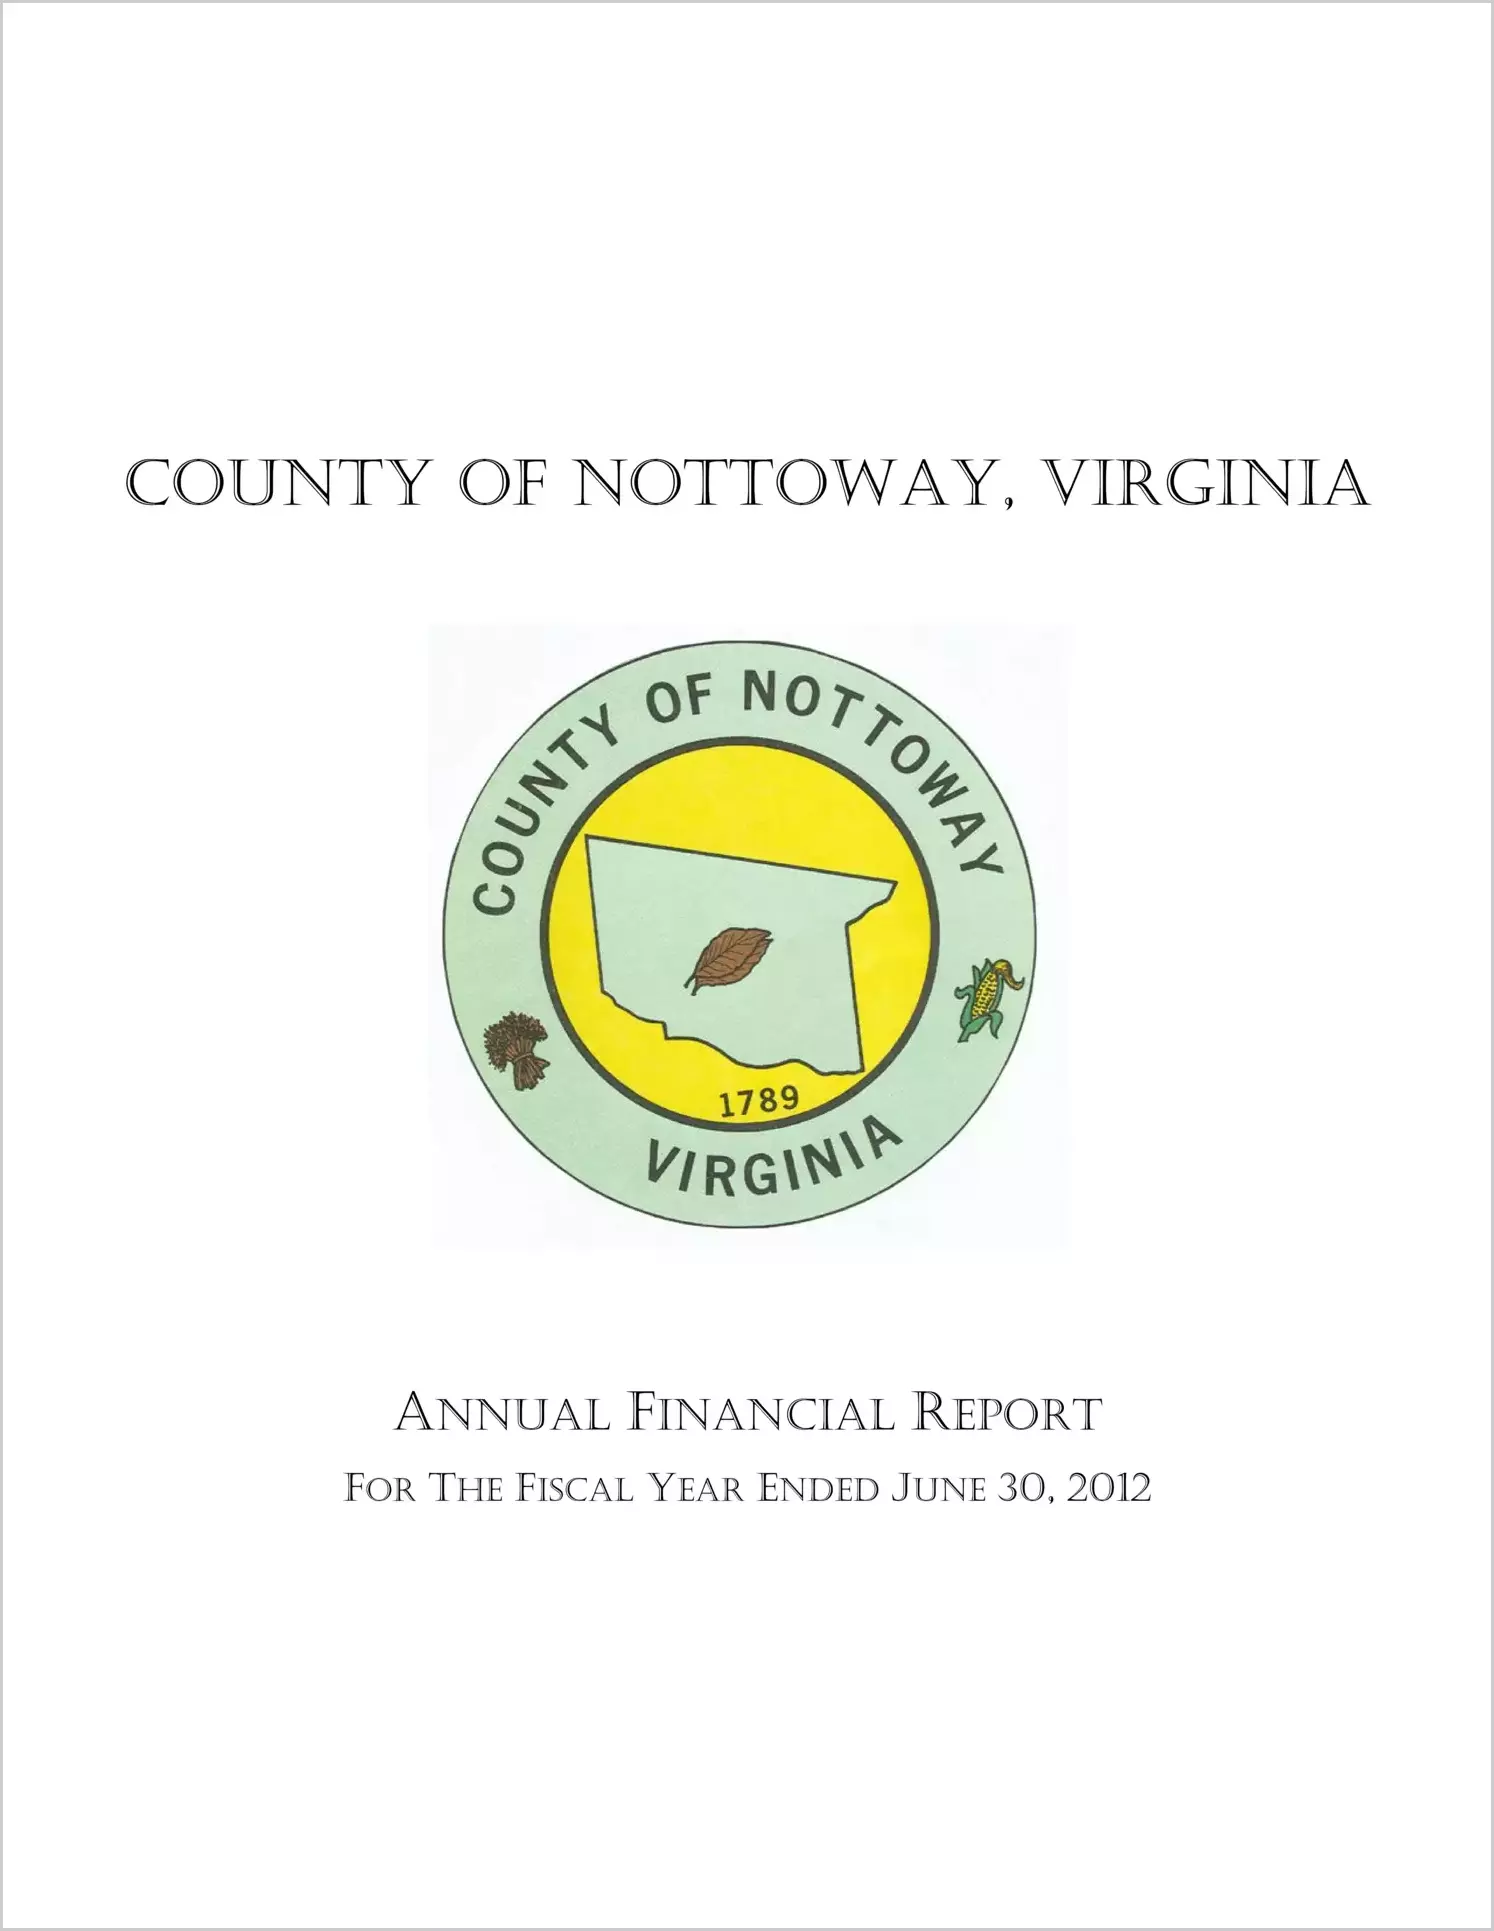 2012 Annual Financial Report for County of Nottoway